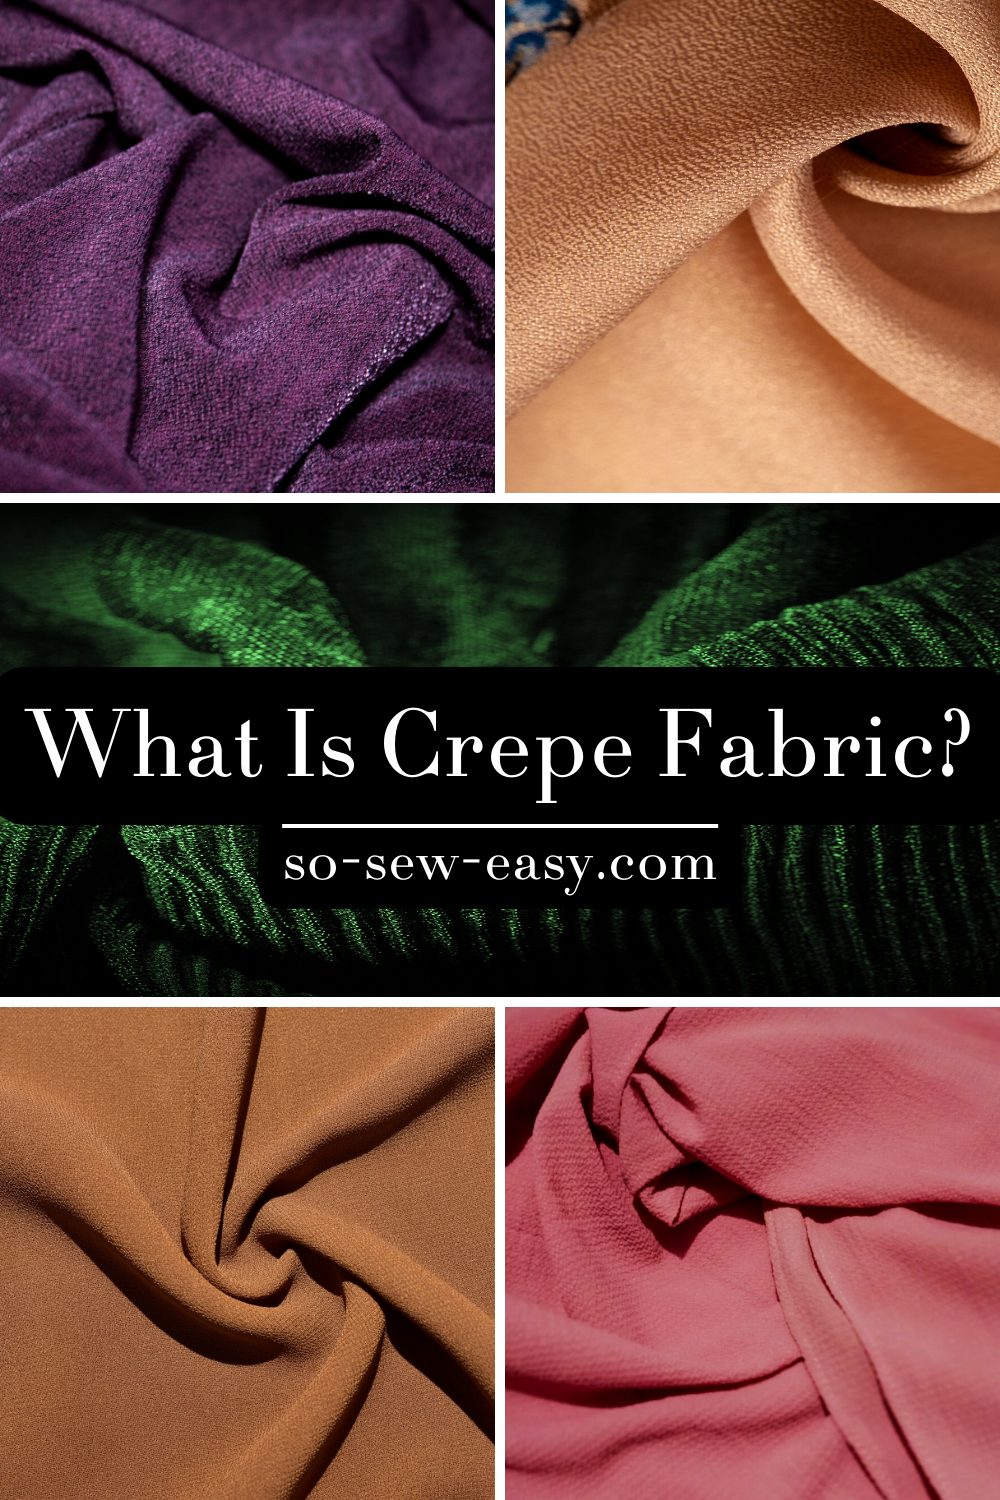 What Is Crepe Fabric - The Good, Bad, And Best Uses